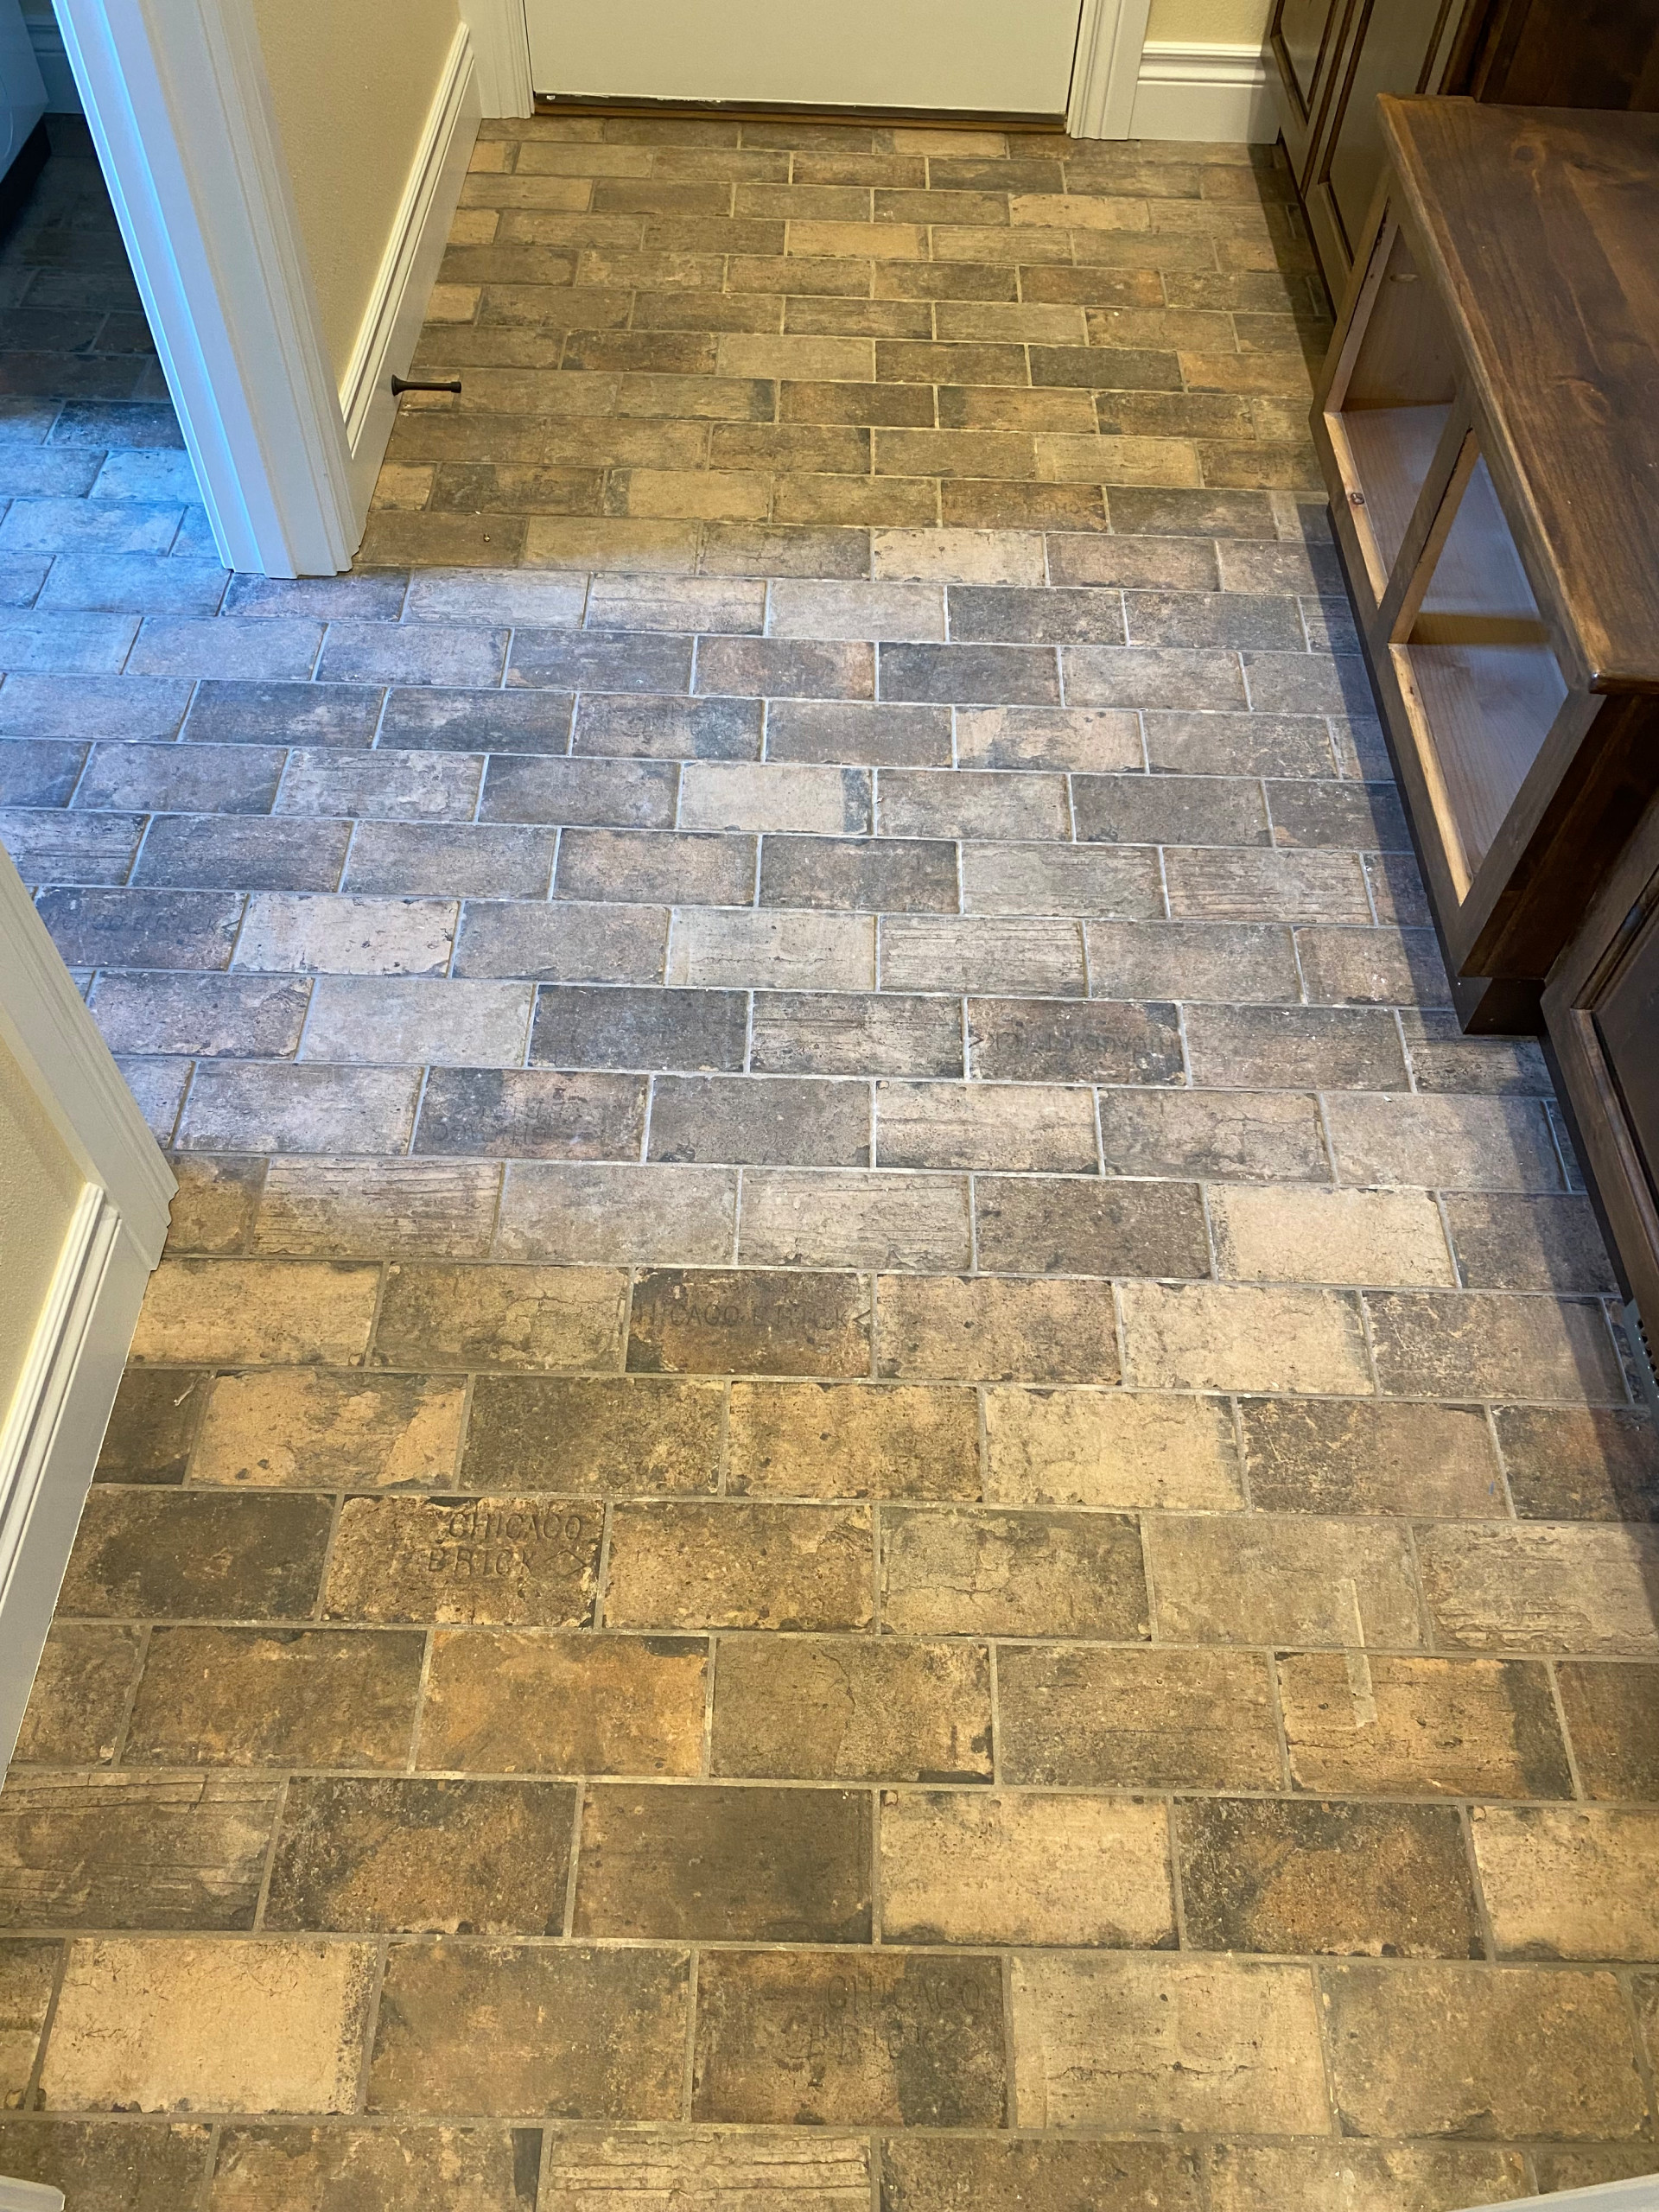 Brick tiled garage entry and laundry room floor